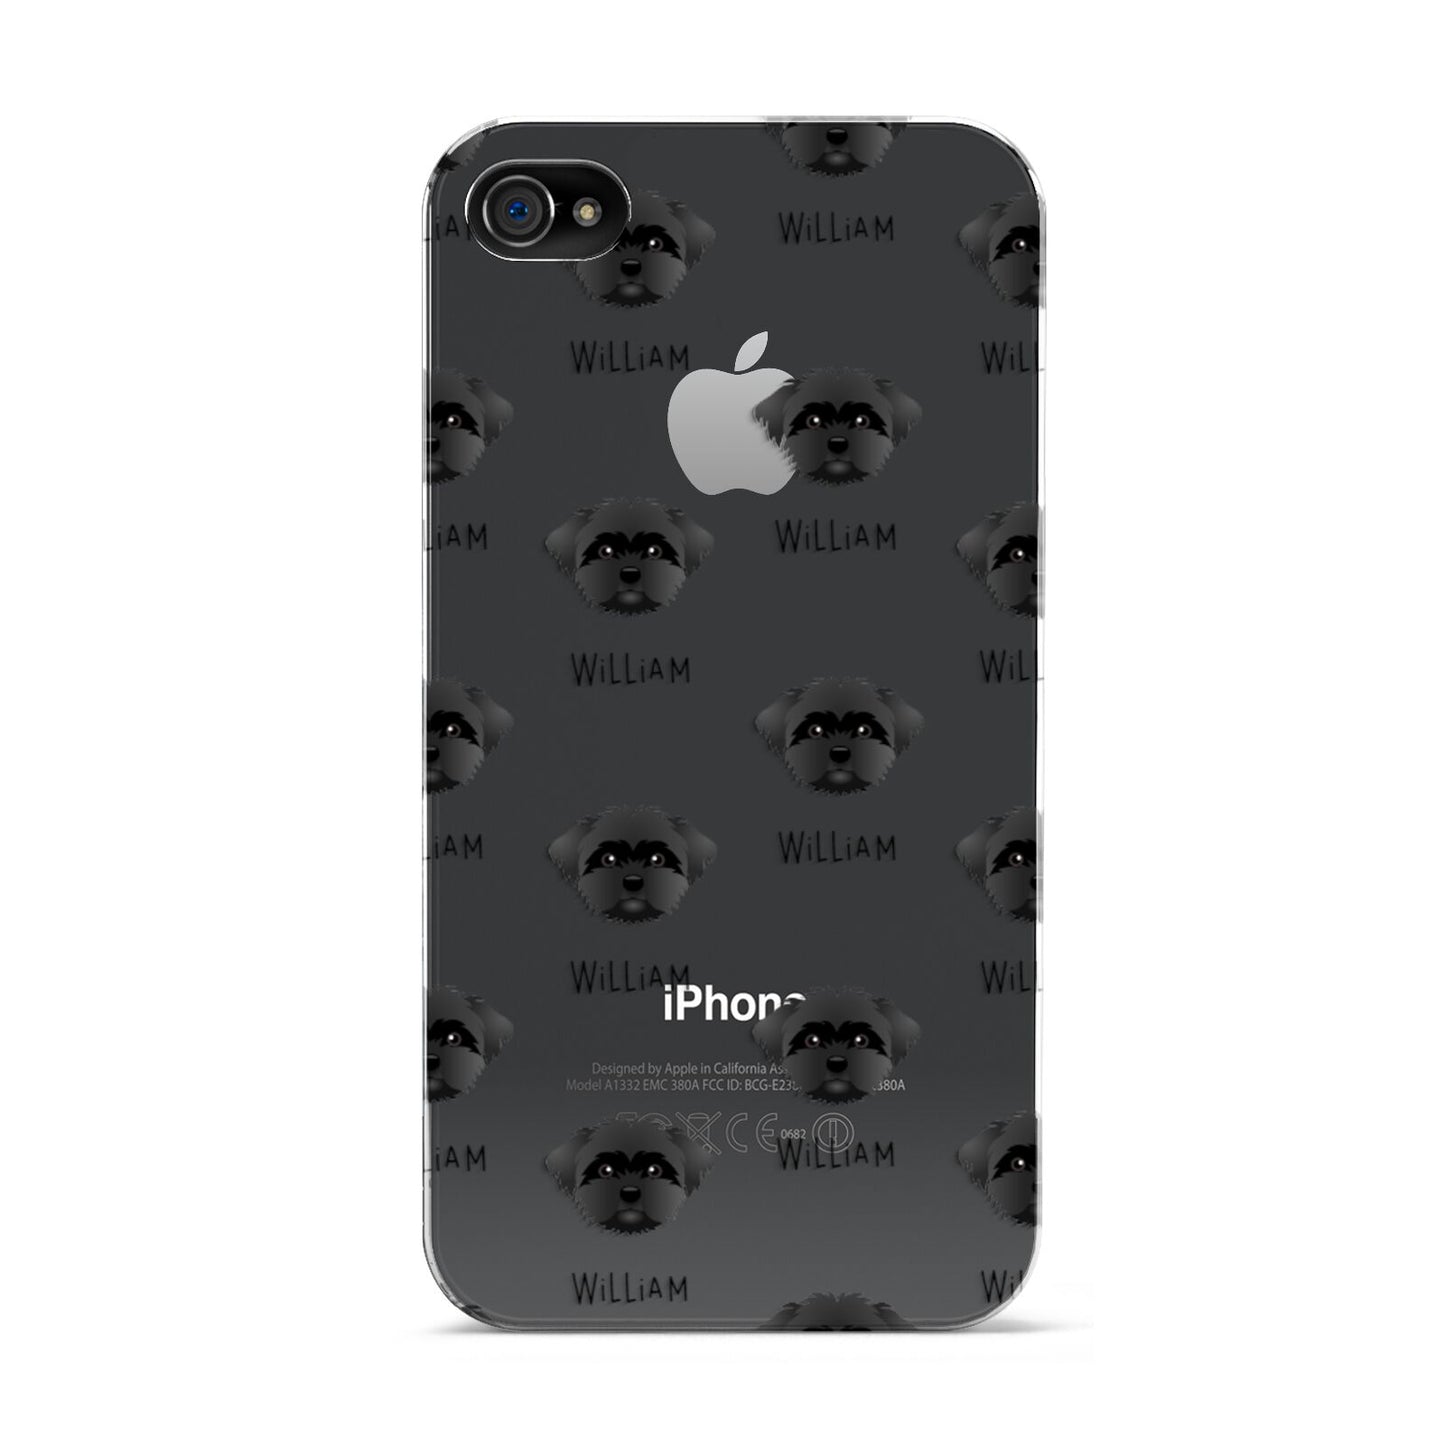 Peek a poo Icon with Name Apple iPhone 4s Case